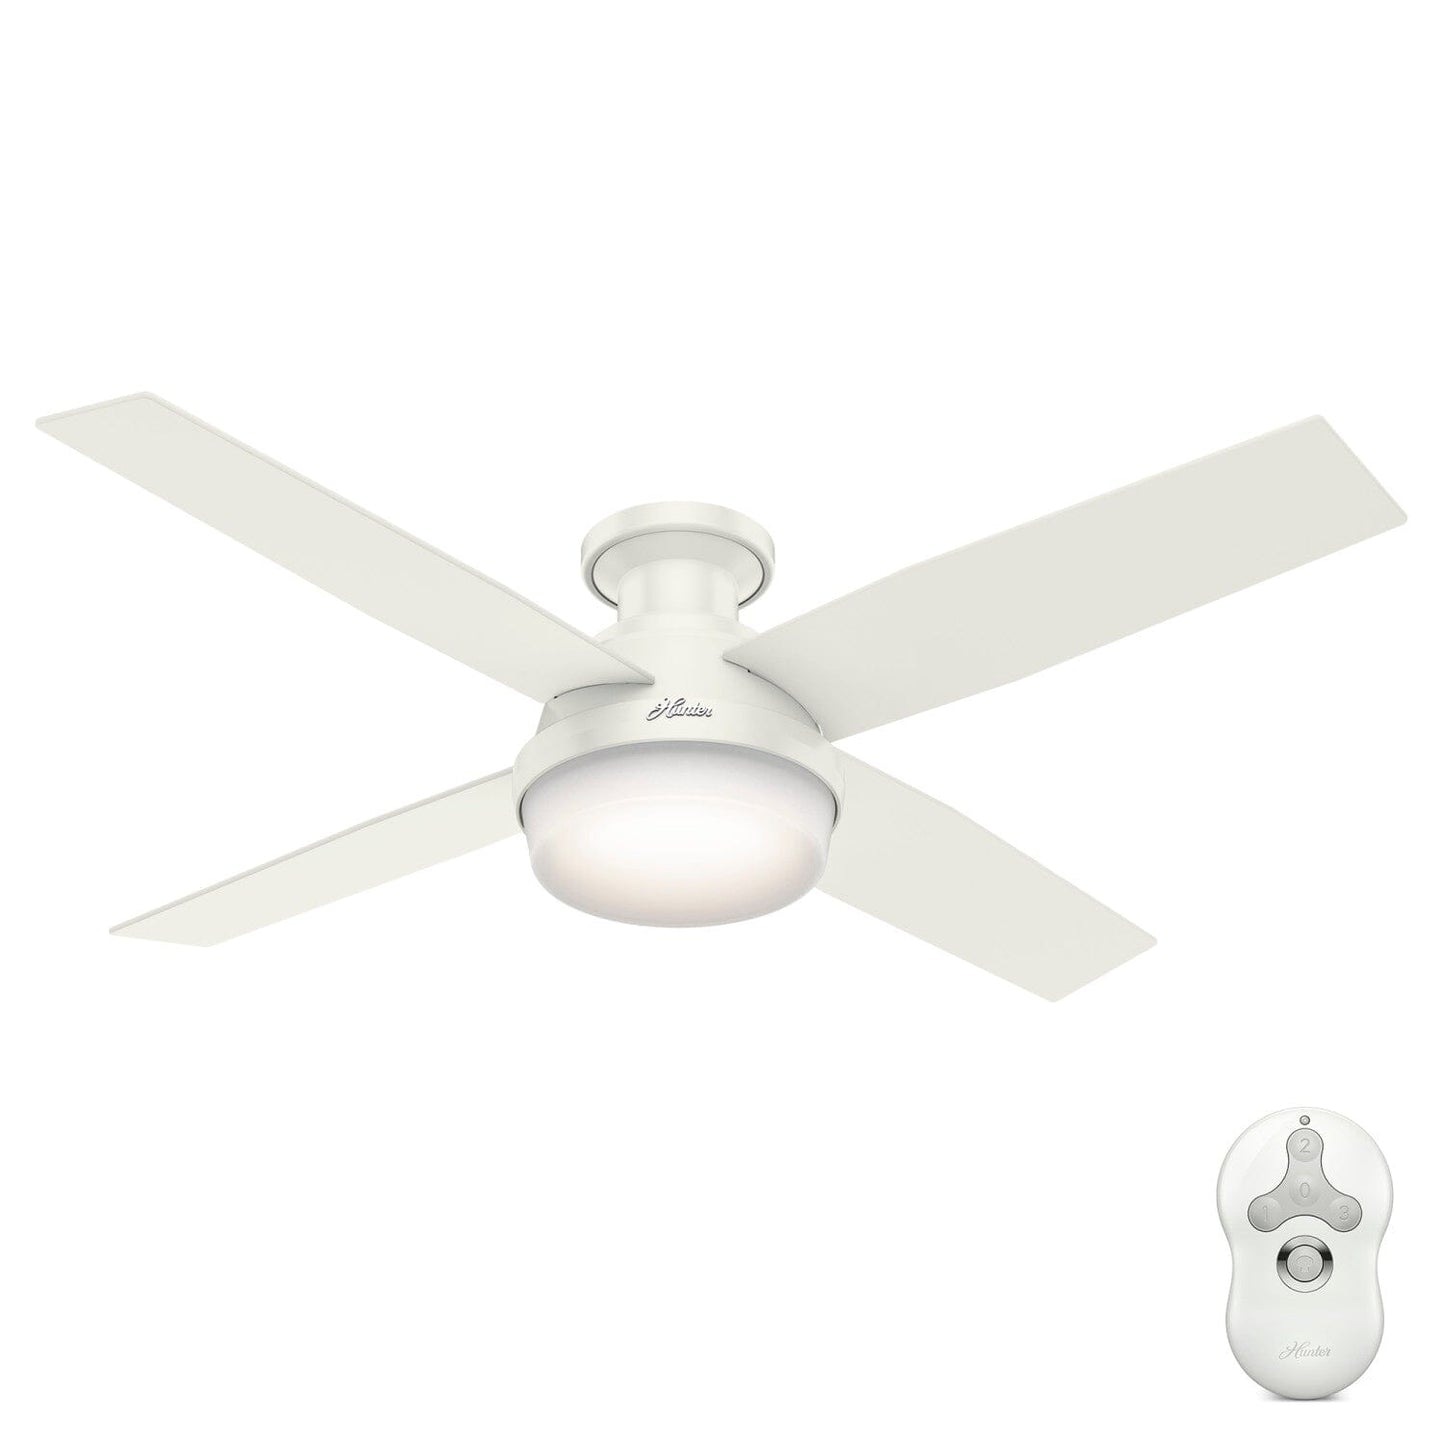 Dempsey Low Profile with Light 52 inch Ceiling Fans Hunter Fresh White - Blonde Oak 